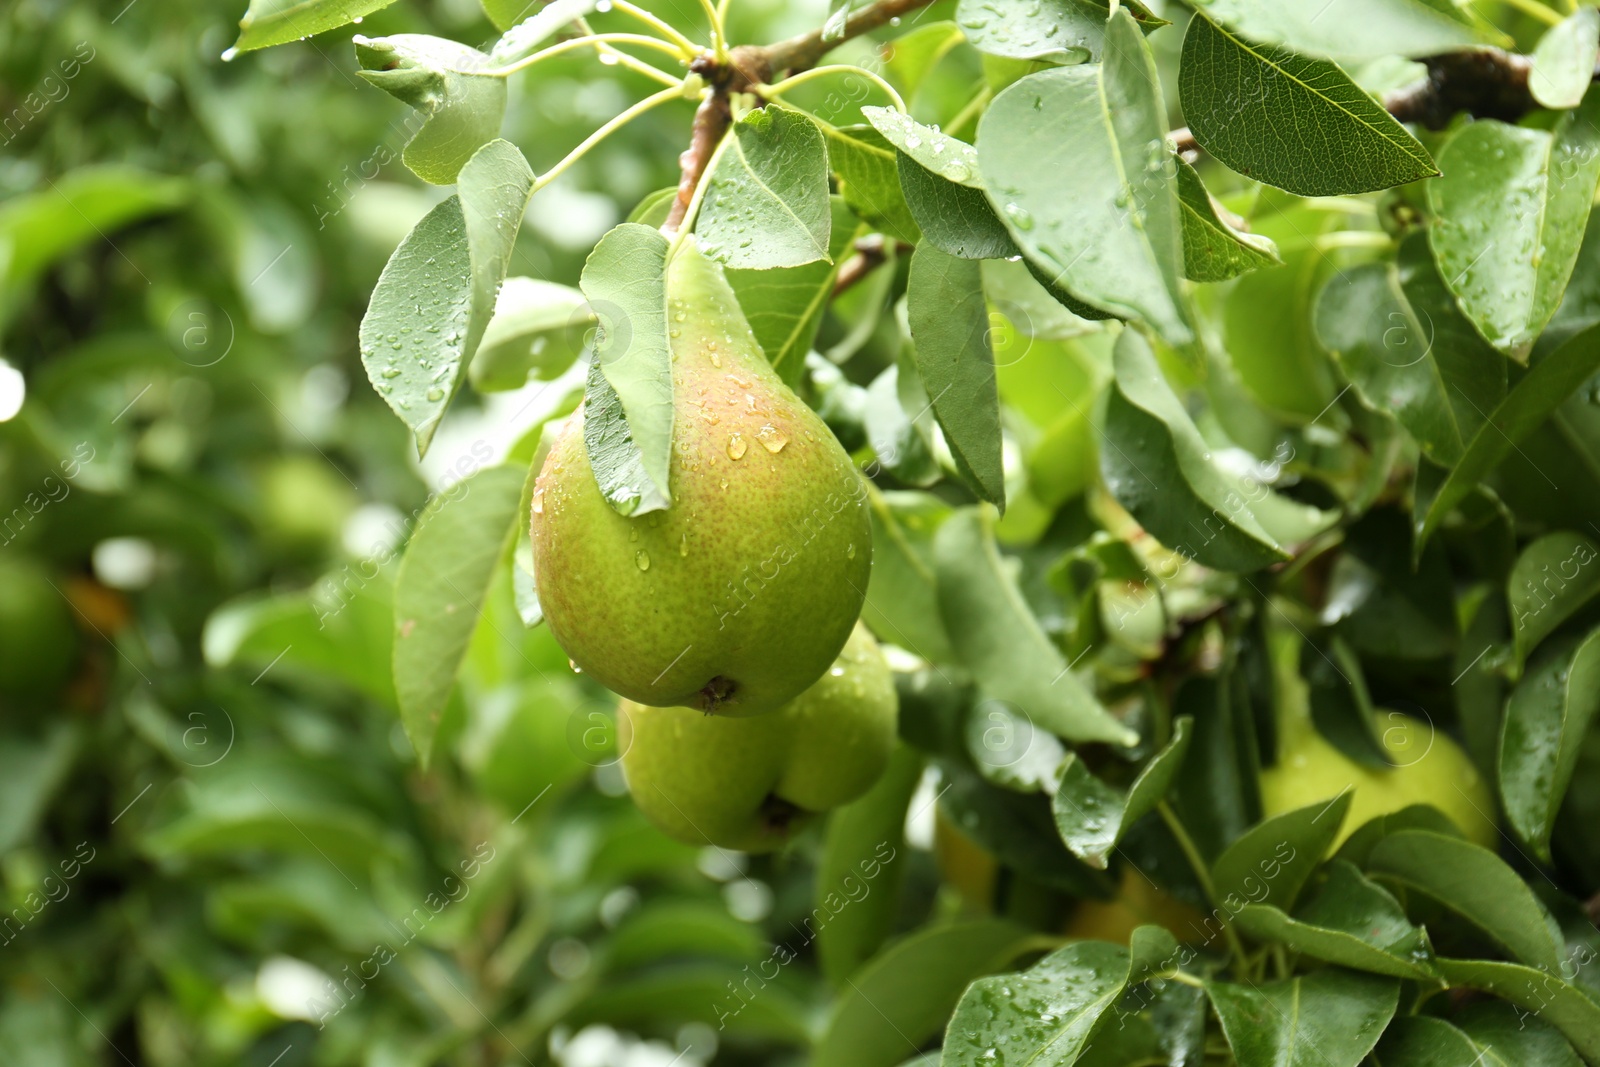 Photo of Ripe pear on tree branch in garden after rain